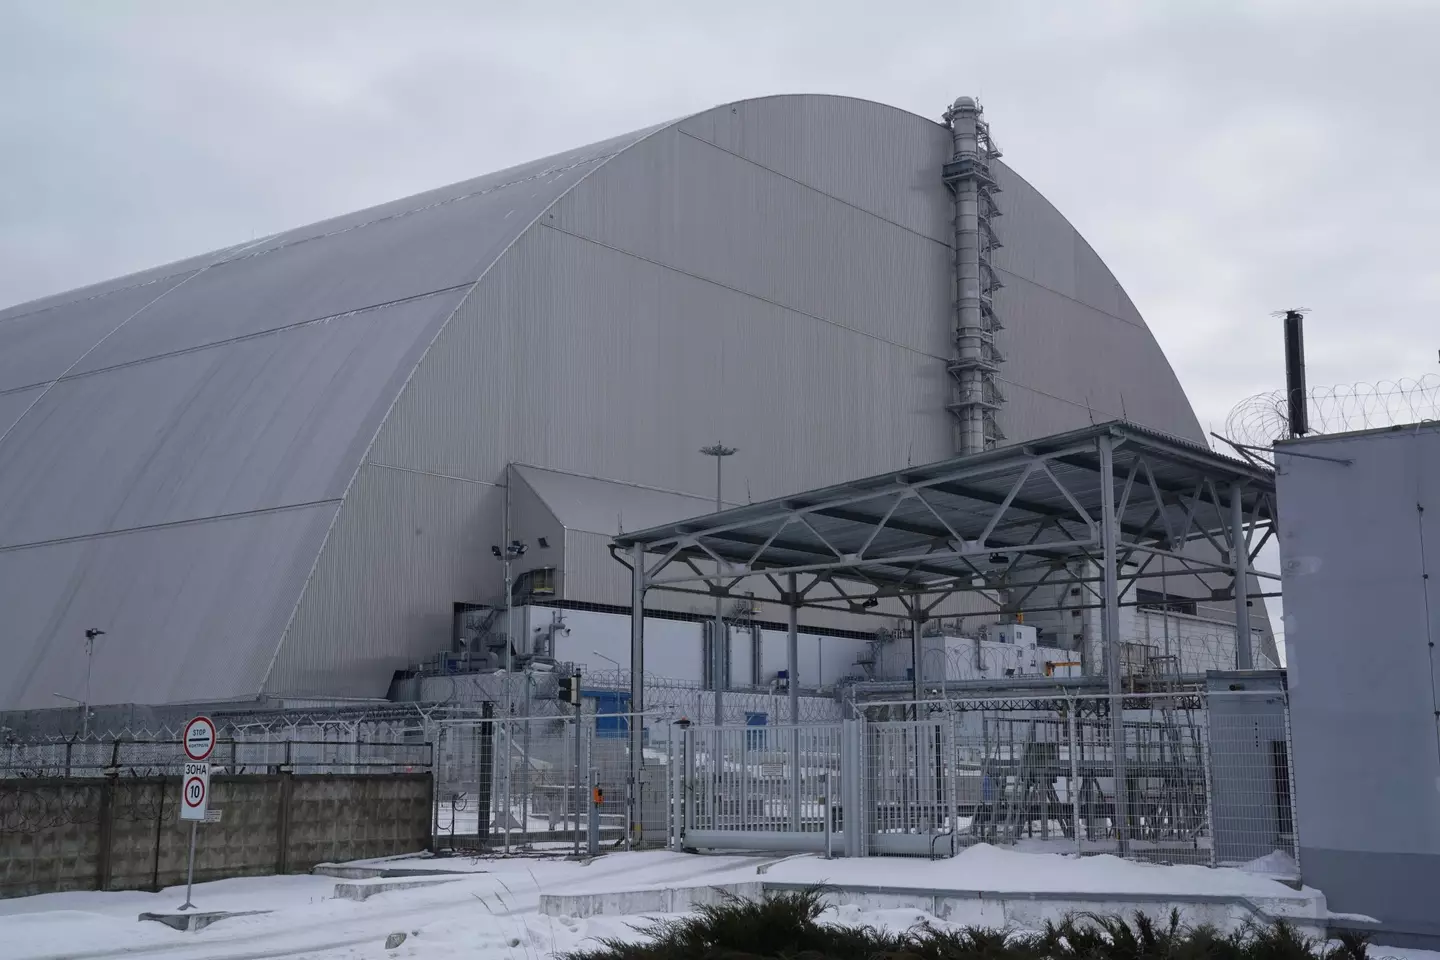 The Chernobyl site has been reconnected to the electricity network.